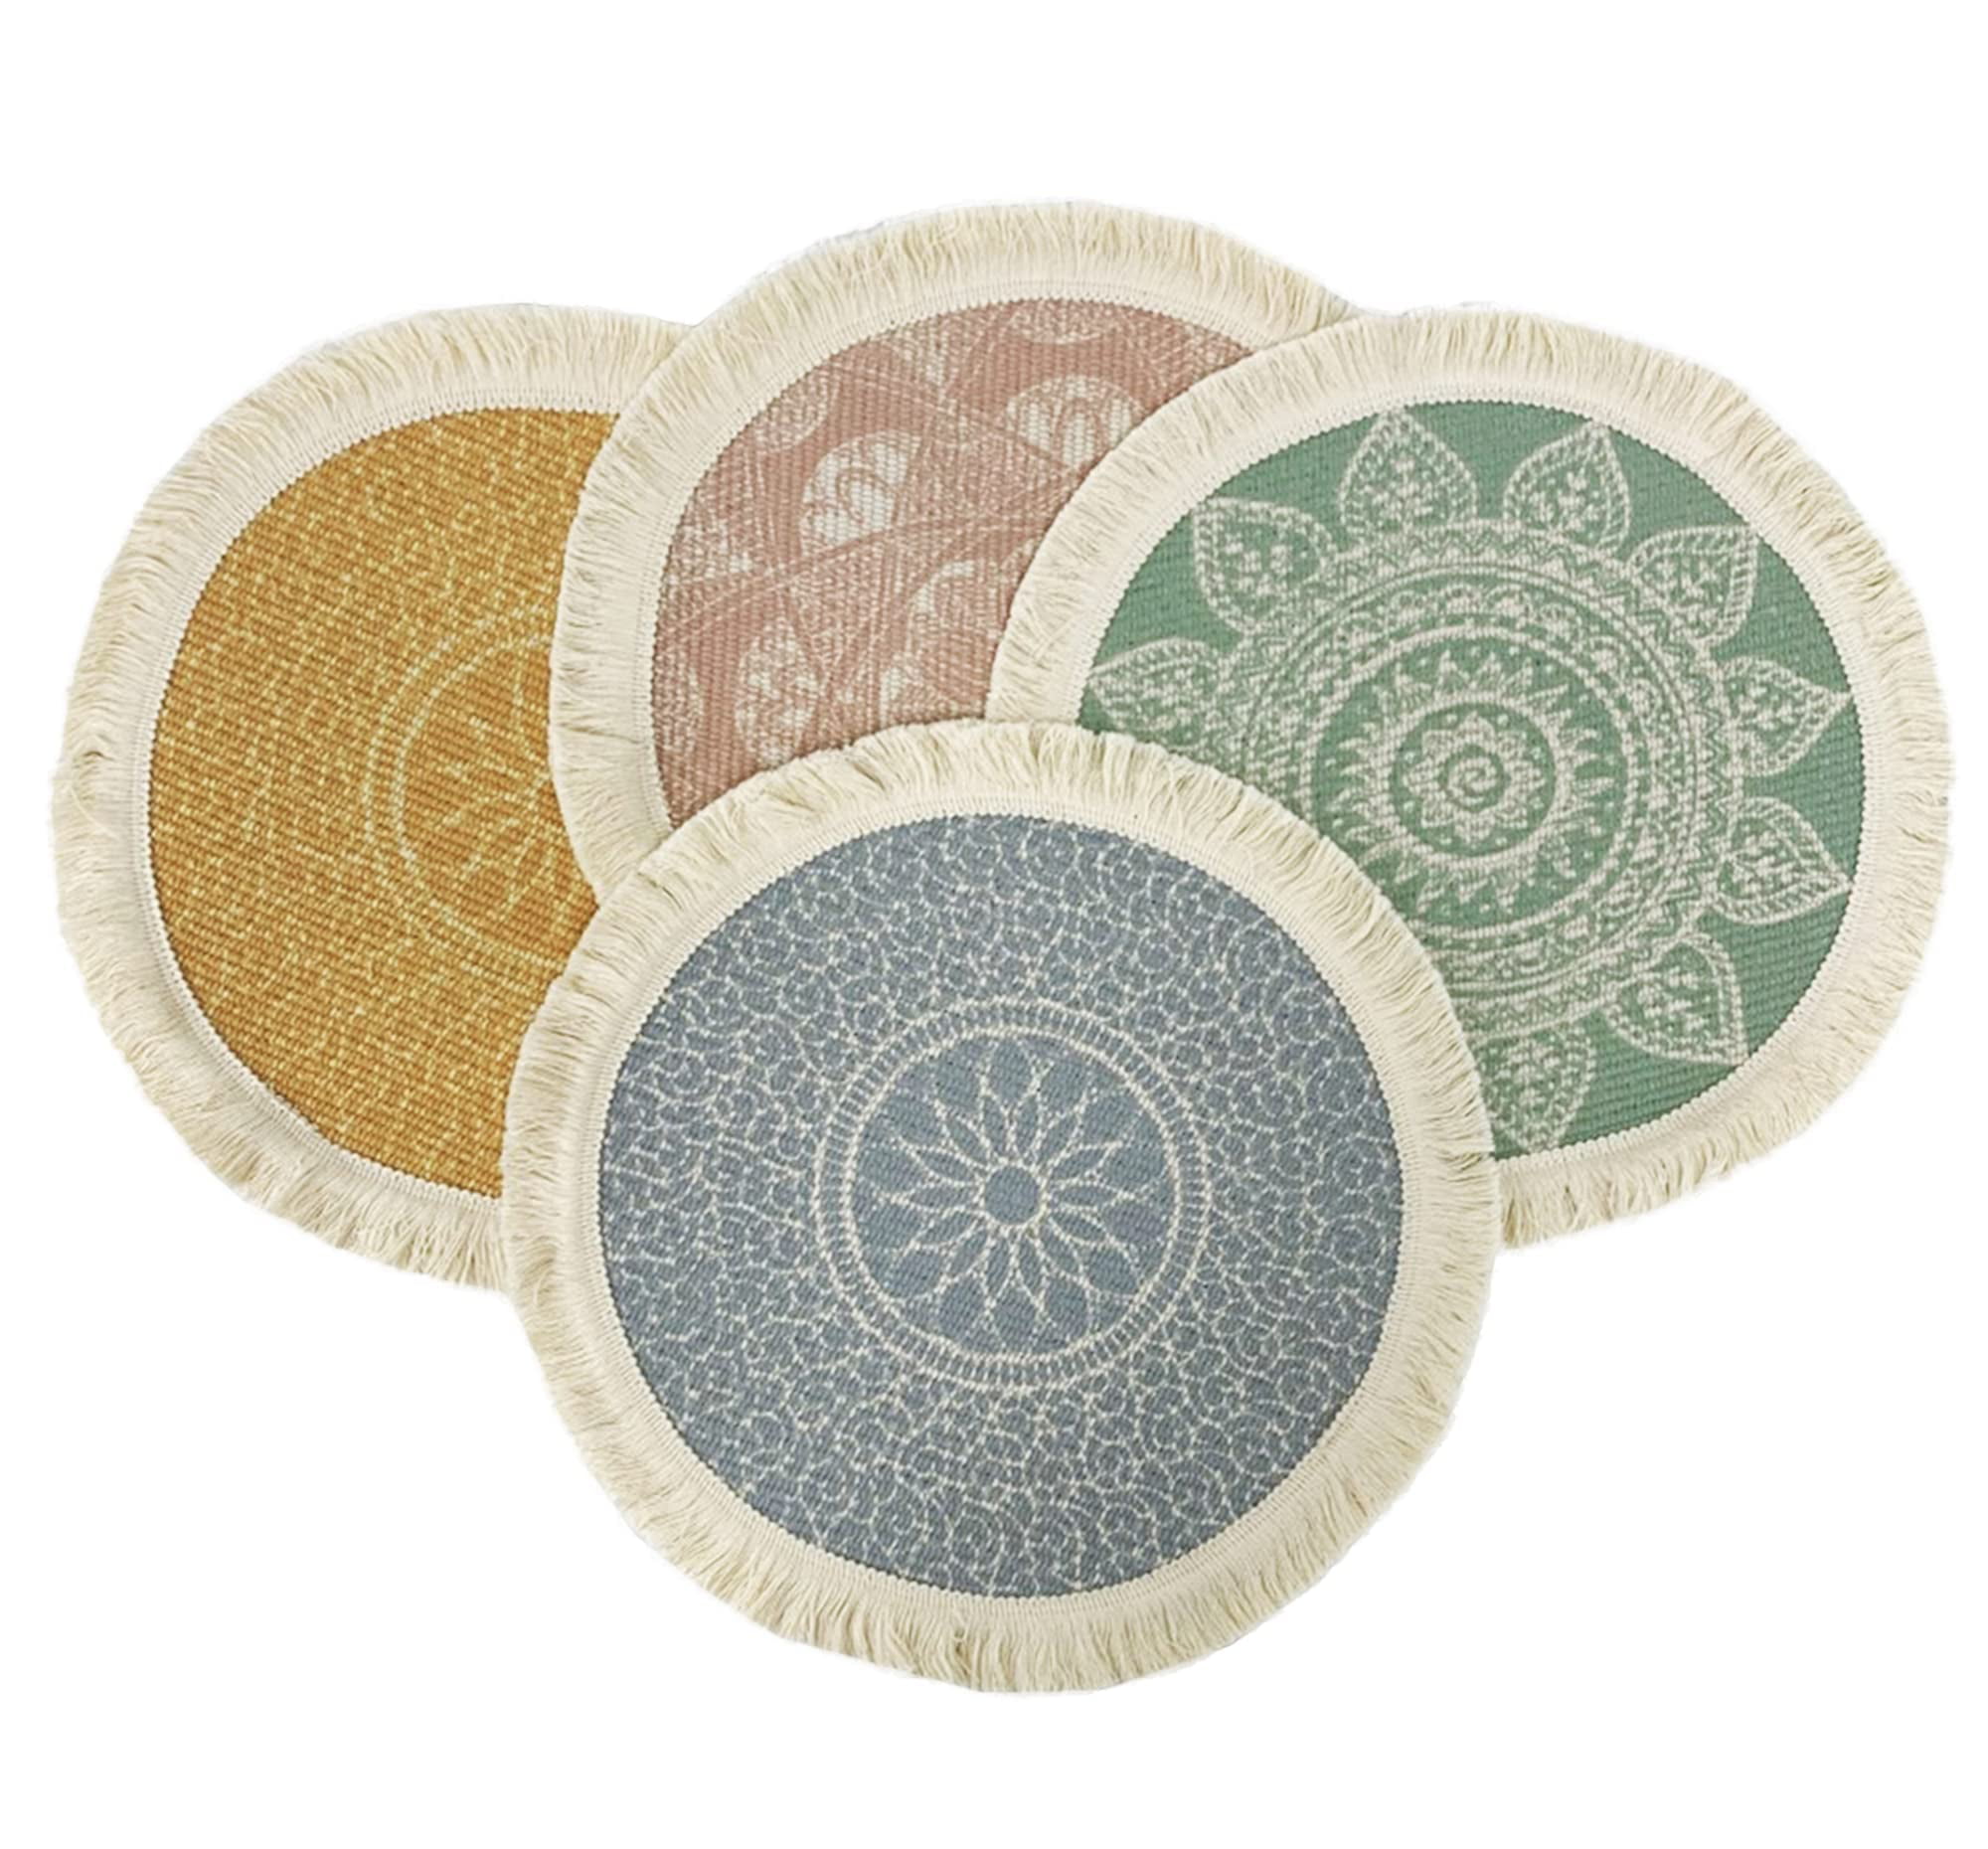 toonhoogte Neerwaarts Gehuurd Fennco Styles Unique Dream Catcher Fringe Cotton Placemats 14-inch Round,  Set of 4 - Multicolored Decorative Table Mats for Home Decor, Dining Table,  Banquets and Special Events - Walmart.com